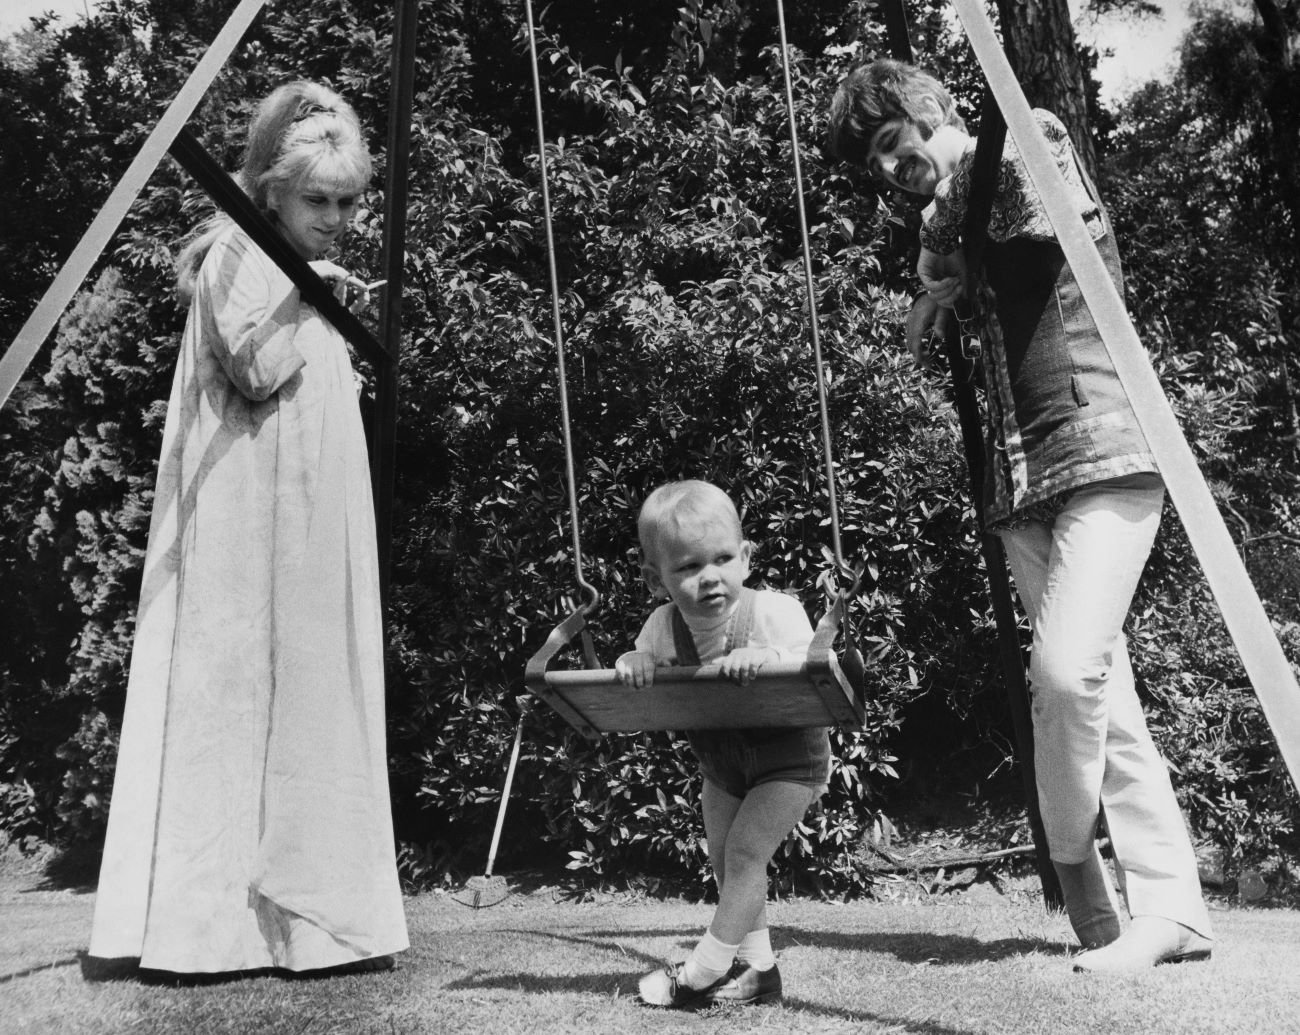 A black and white picture of Maureen Starkey and Ringo Starr watching their son Zak lean on a swing.